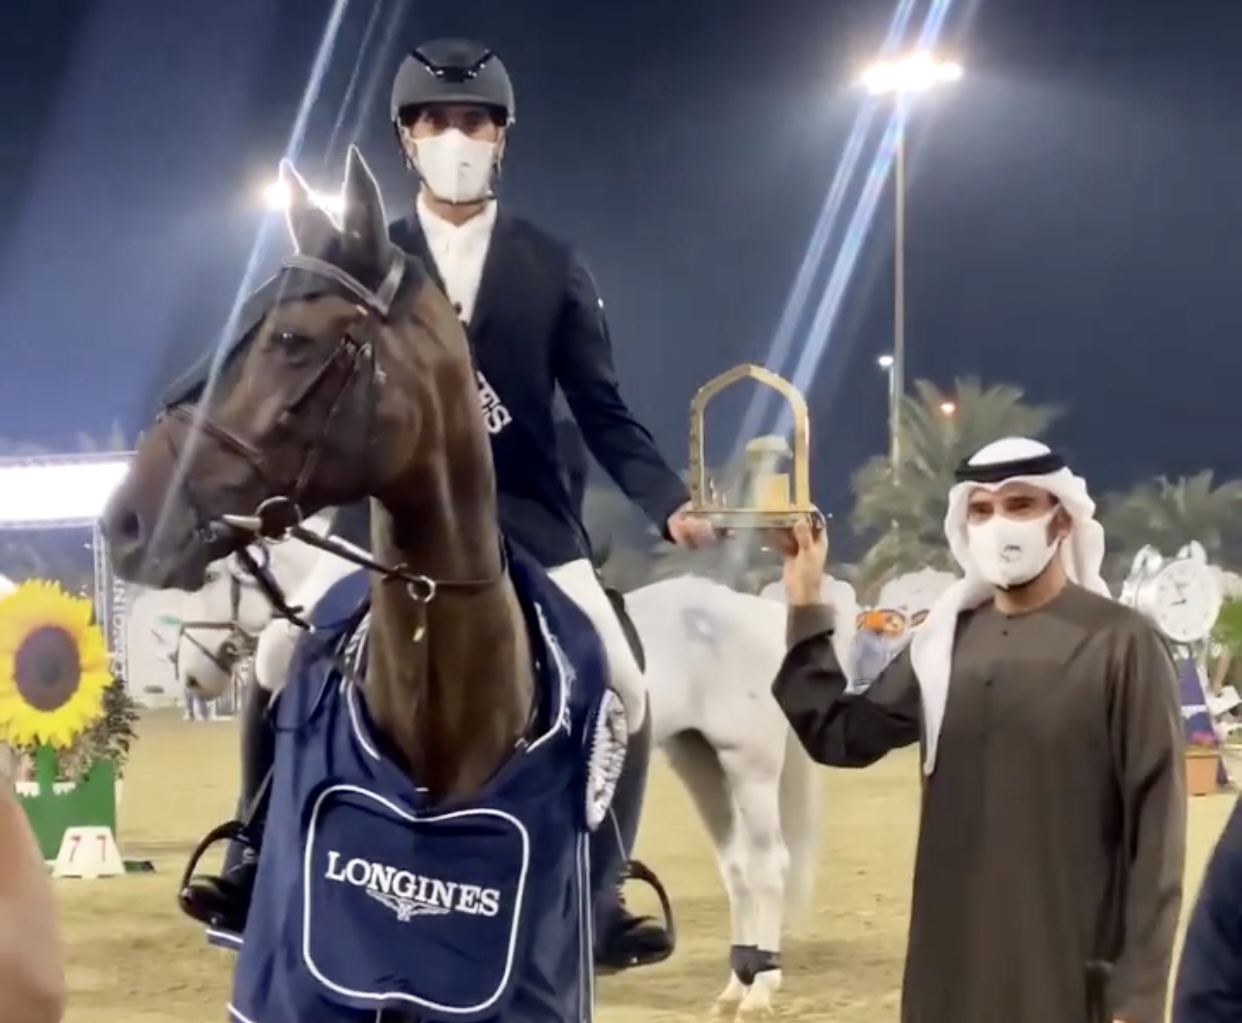 Mohamed Shafi Mohamed Alremeithi claimed victory in the CSI3* 1.45m Longines Grand Prix Qualifier of Sharjah